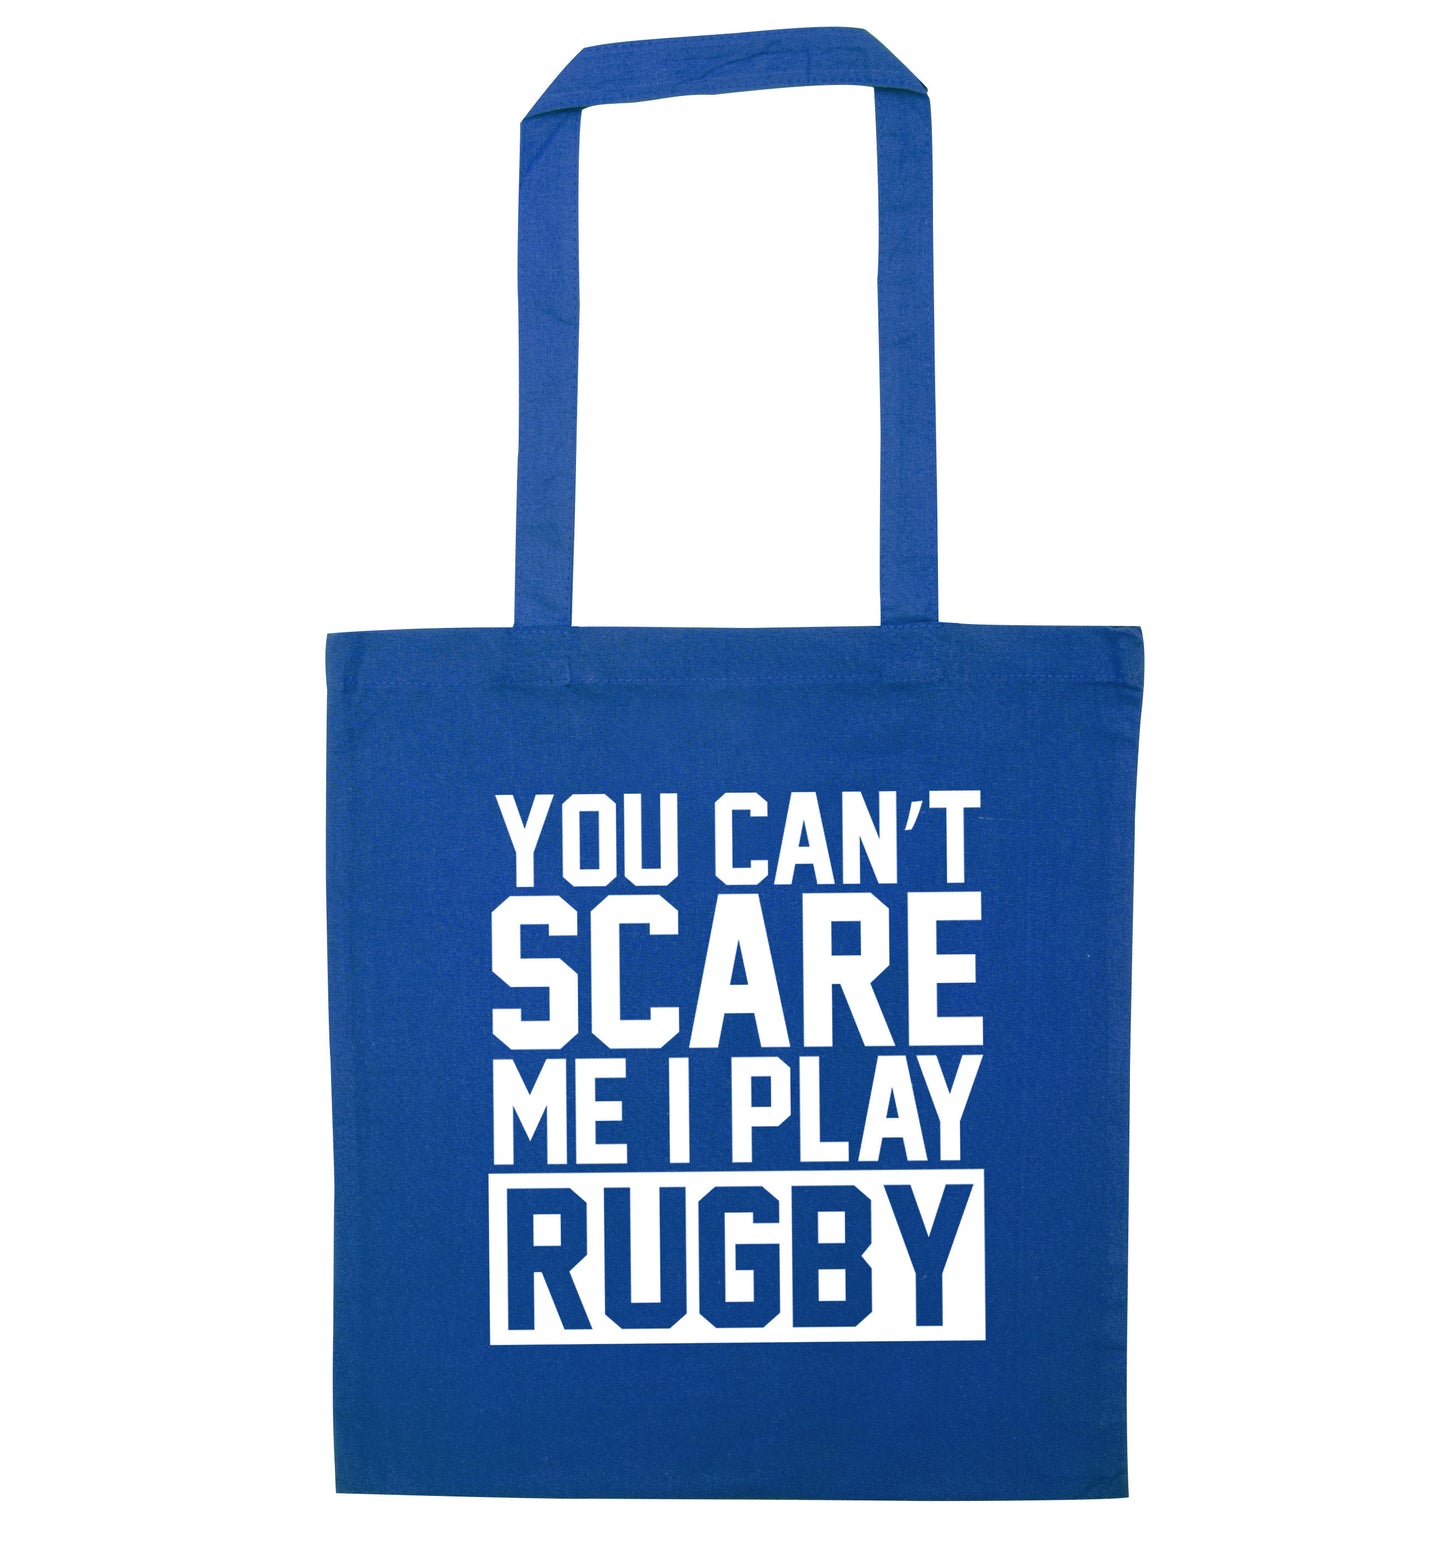 You can't scare me I play rugby blue tote bag